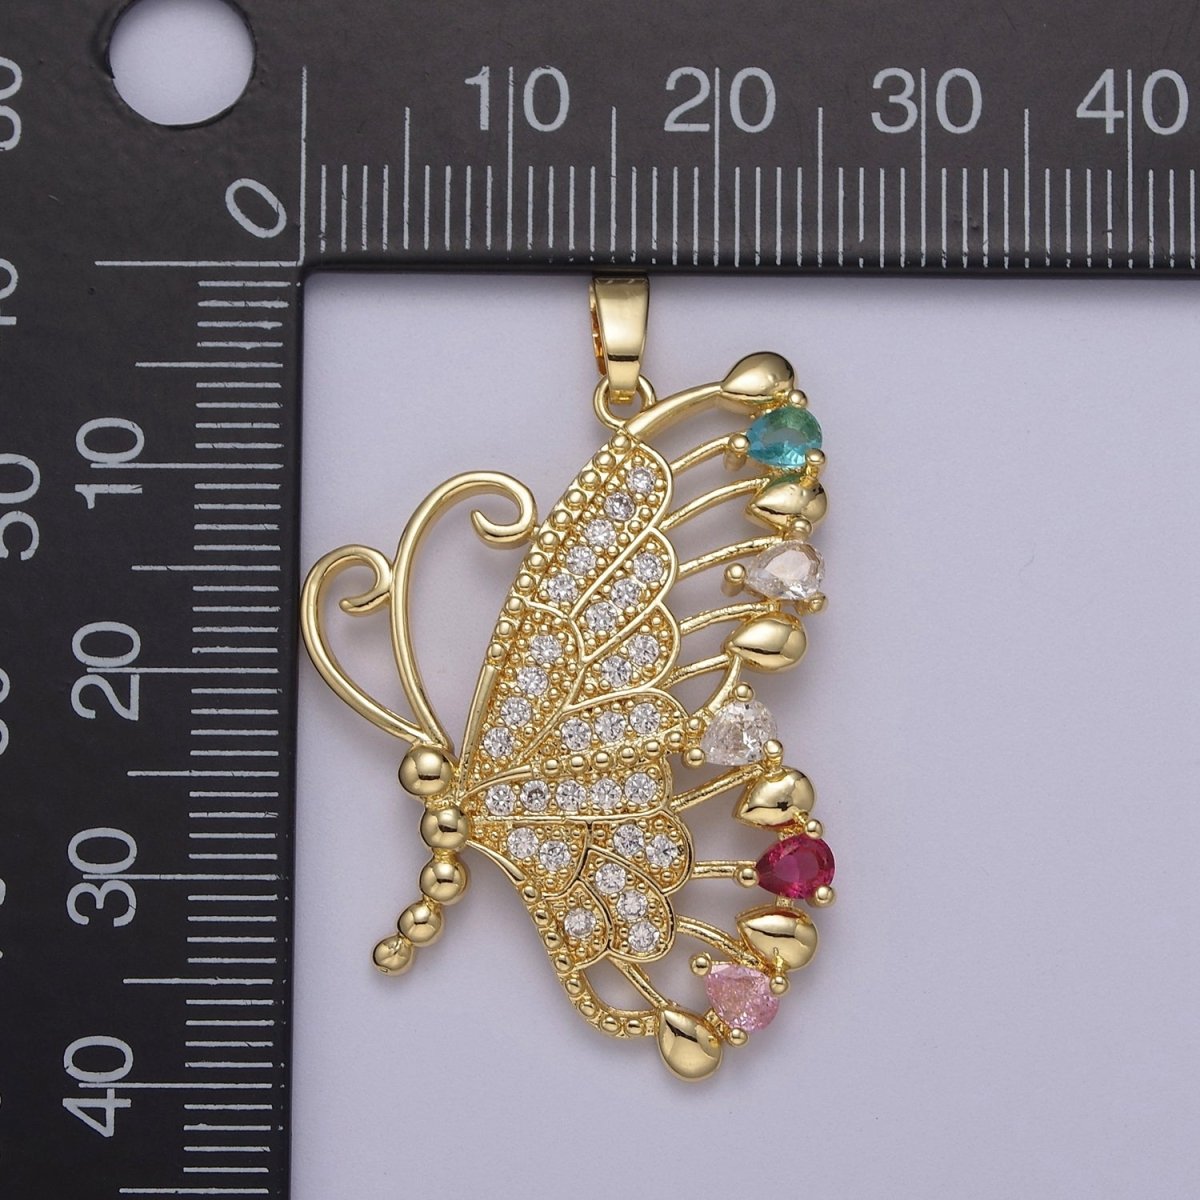 Big CZ Butterfly Pendant 24K Gold Filled Mariposa Charm Necklace Supply J-518 - DLUXCA